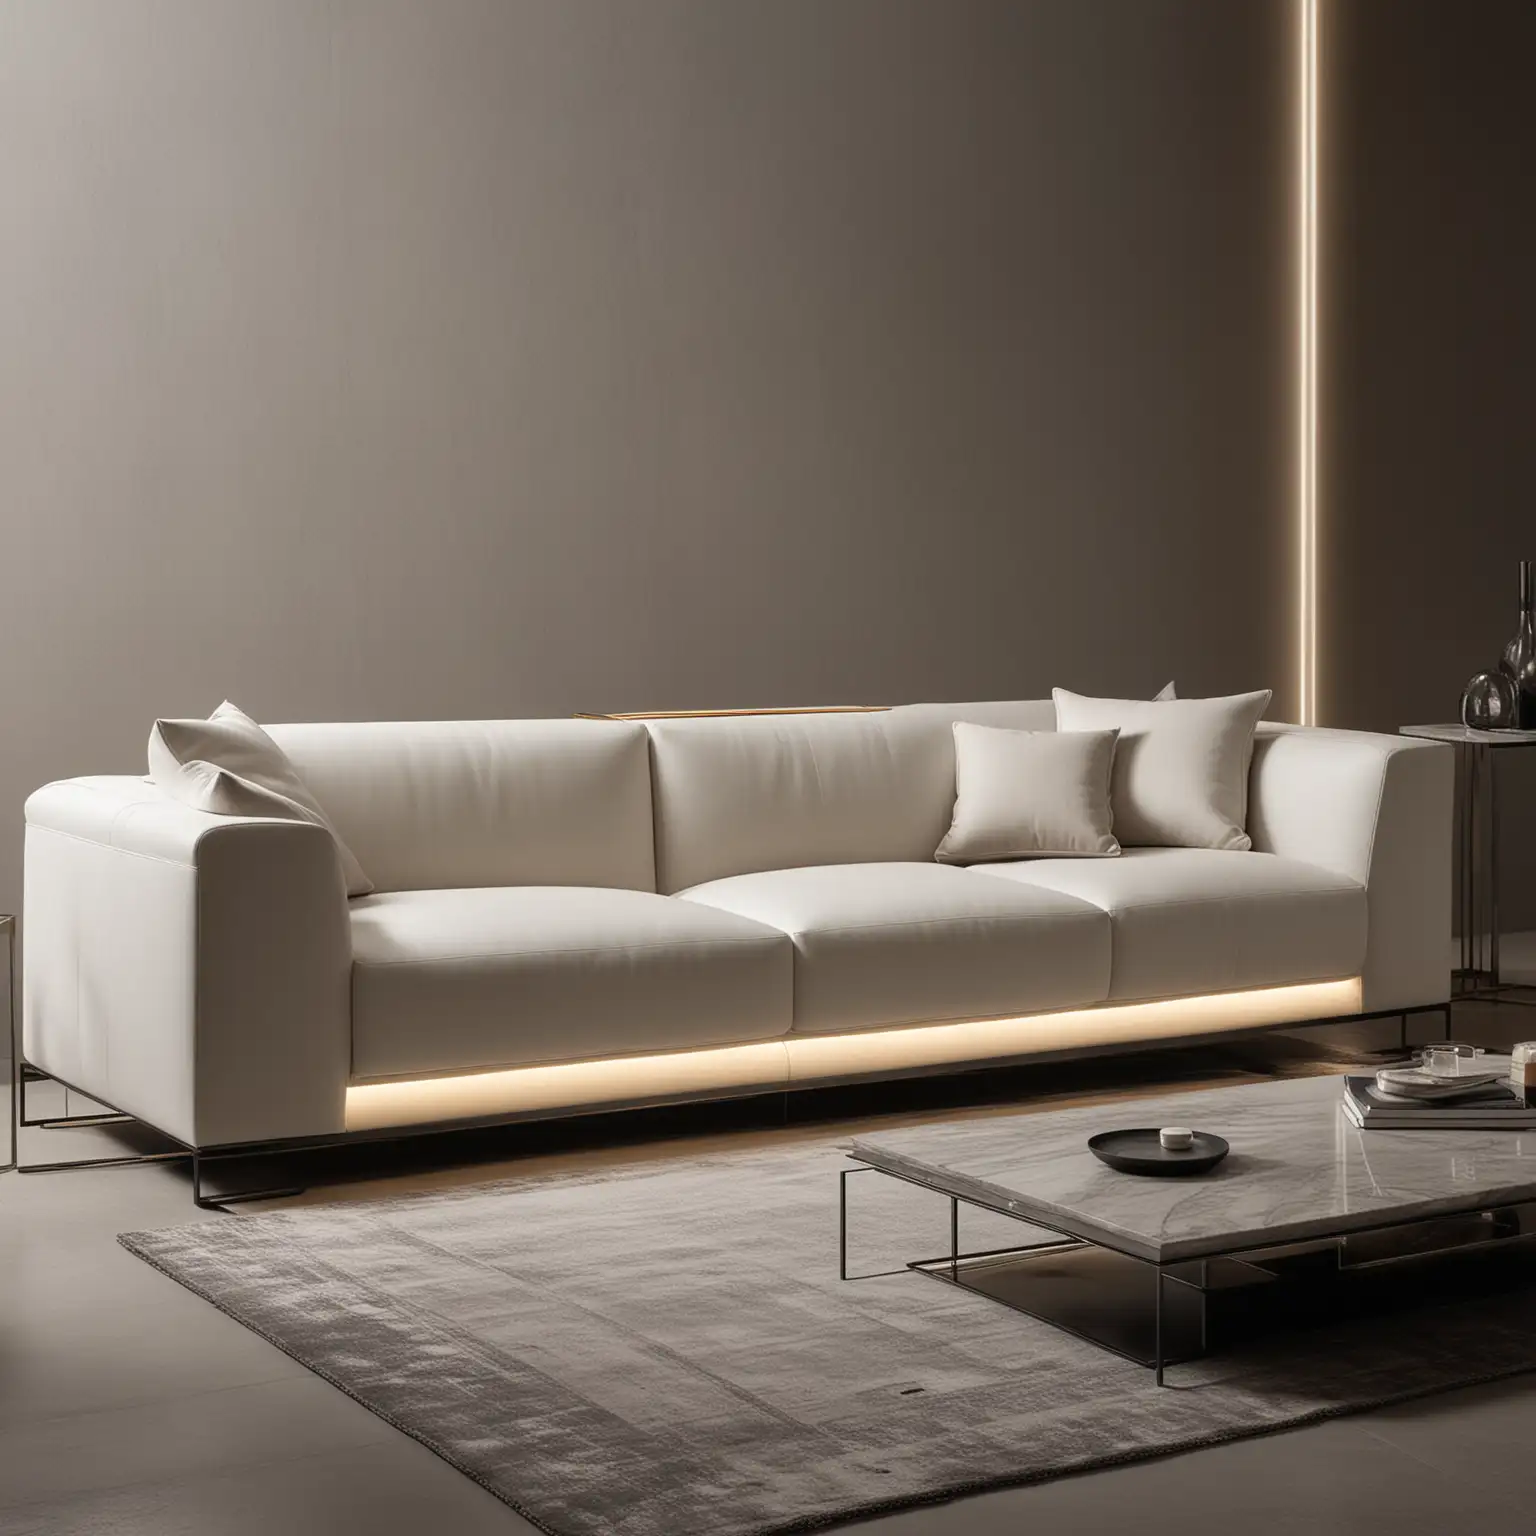 Italian style sofa design with Turkish touches, modern lines, minimal LED detail



